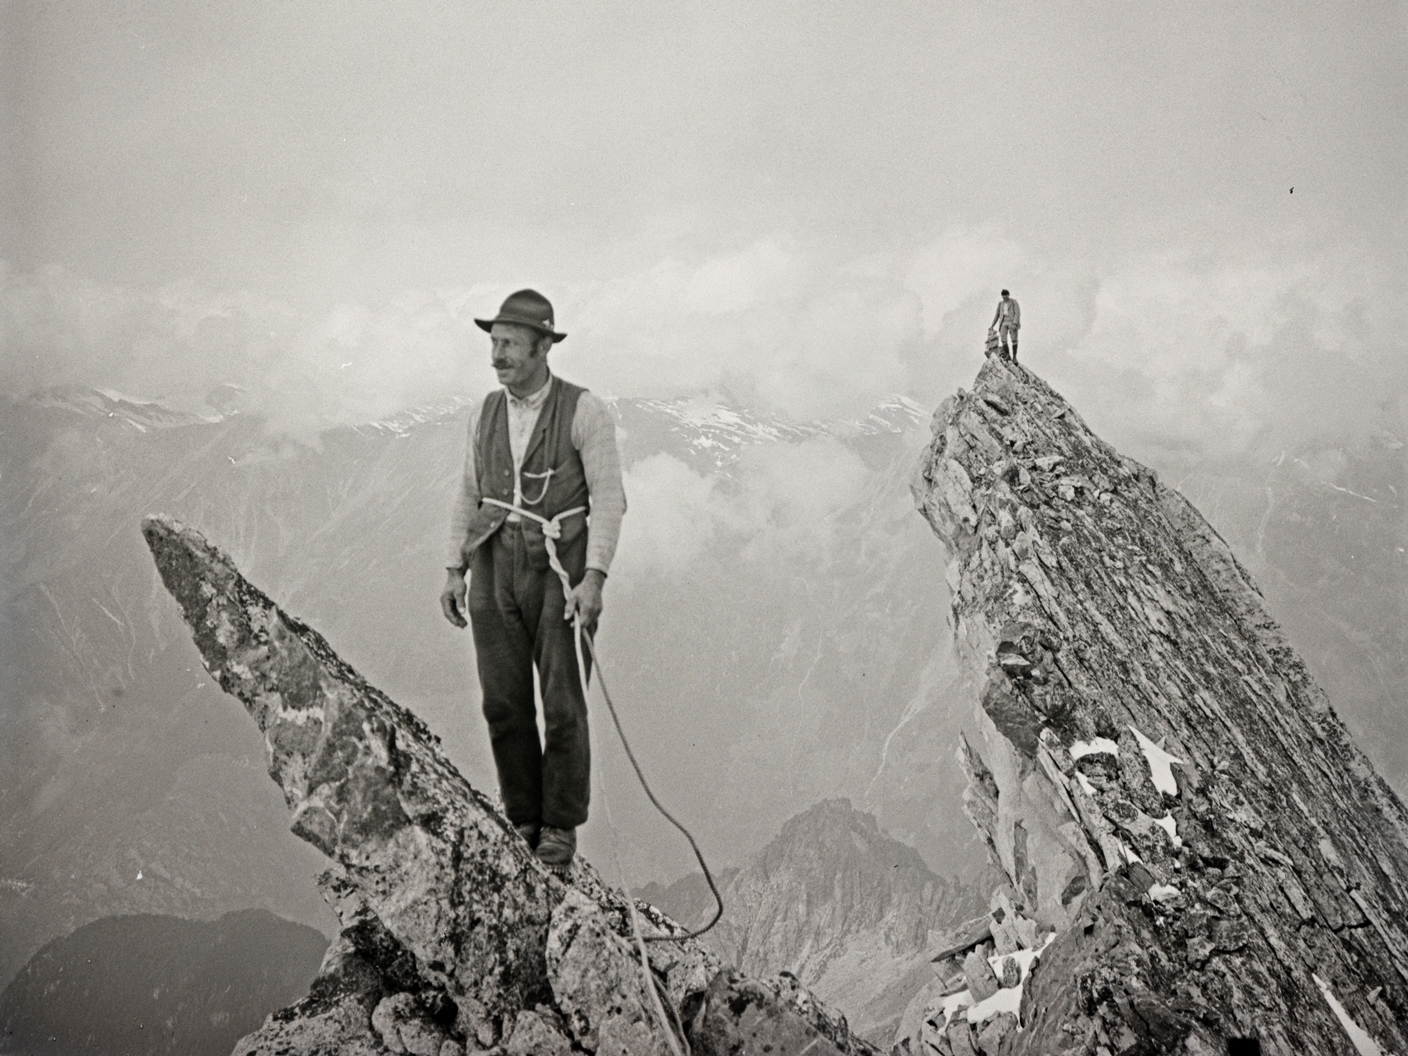 Enlarged view: Rudolf Staub on top of a mountain